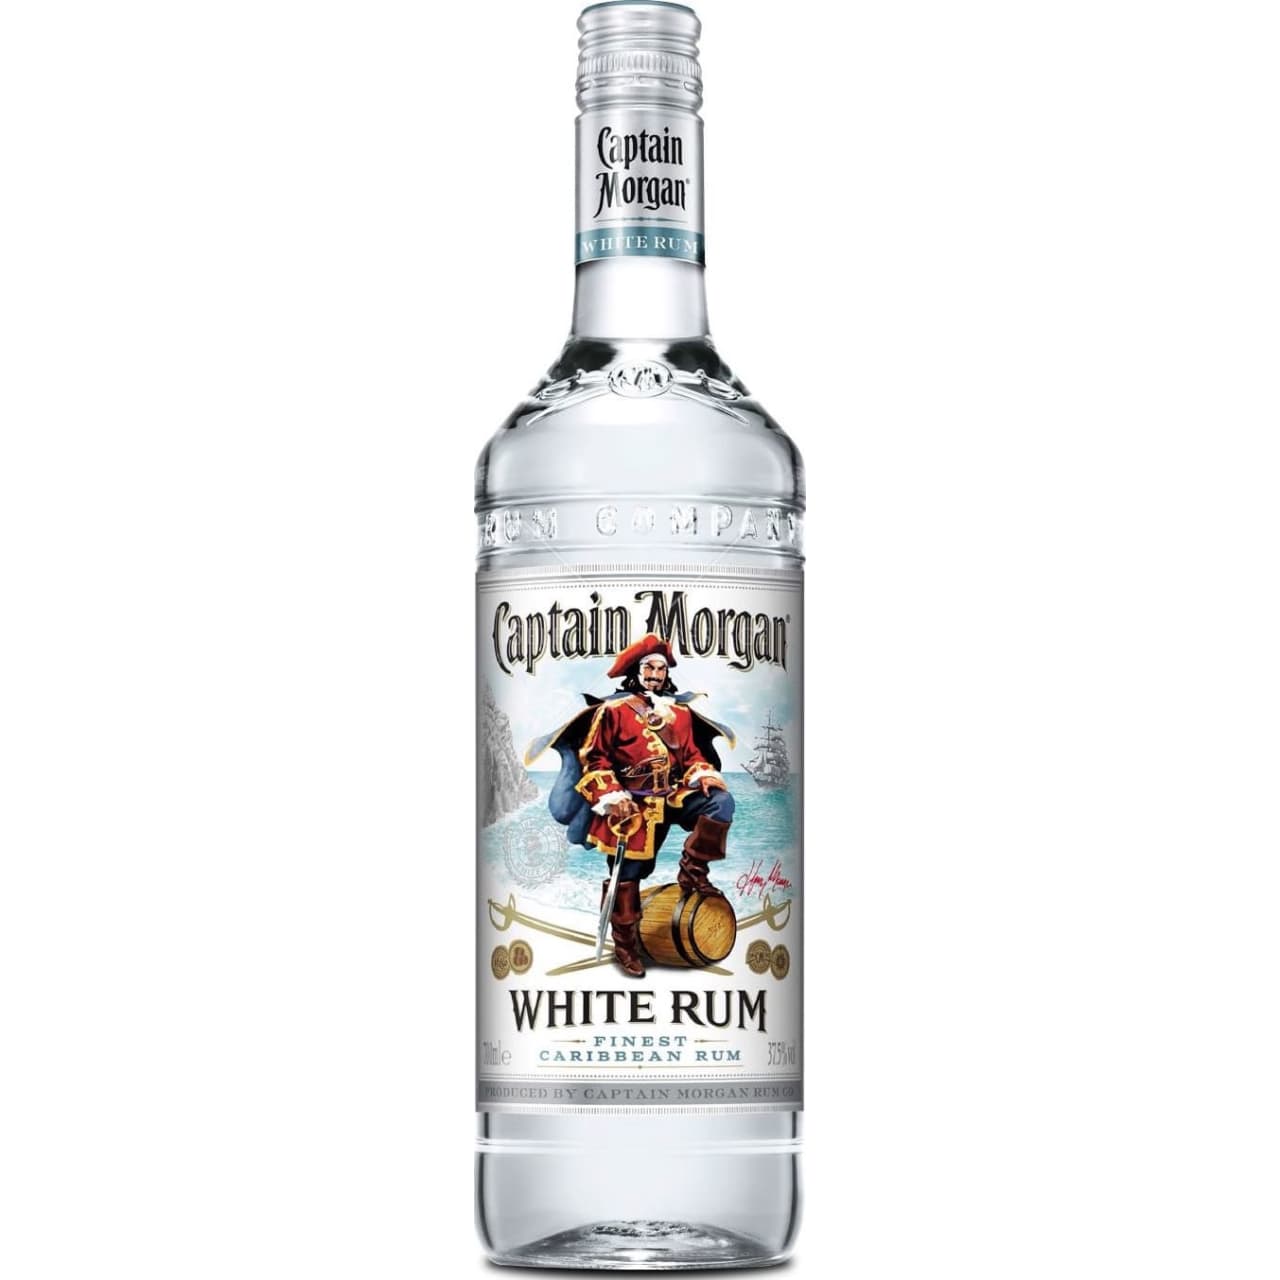 Captain Morgan White Rum is created from the finest of Caribbean rums and has a crisp, clean and refreshing taste.